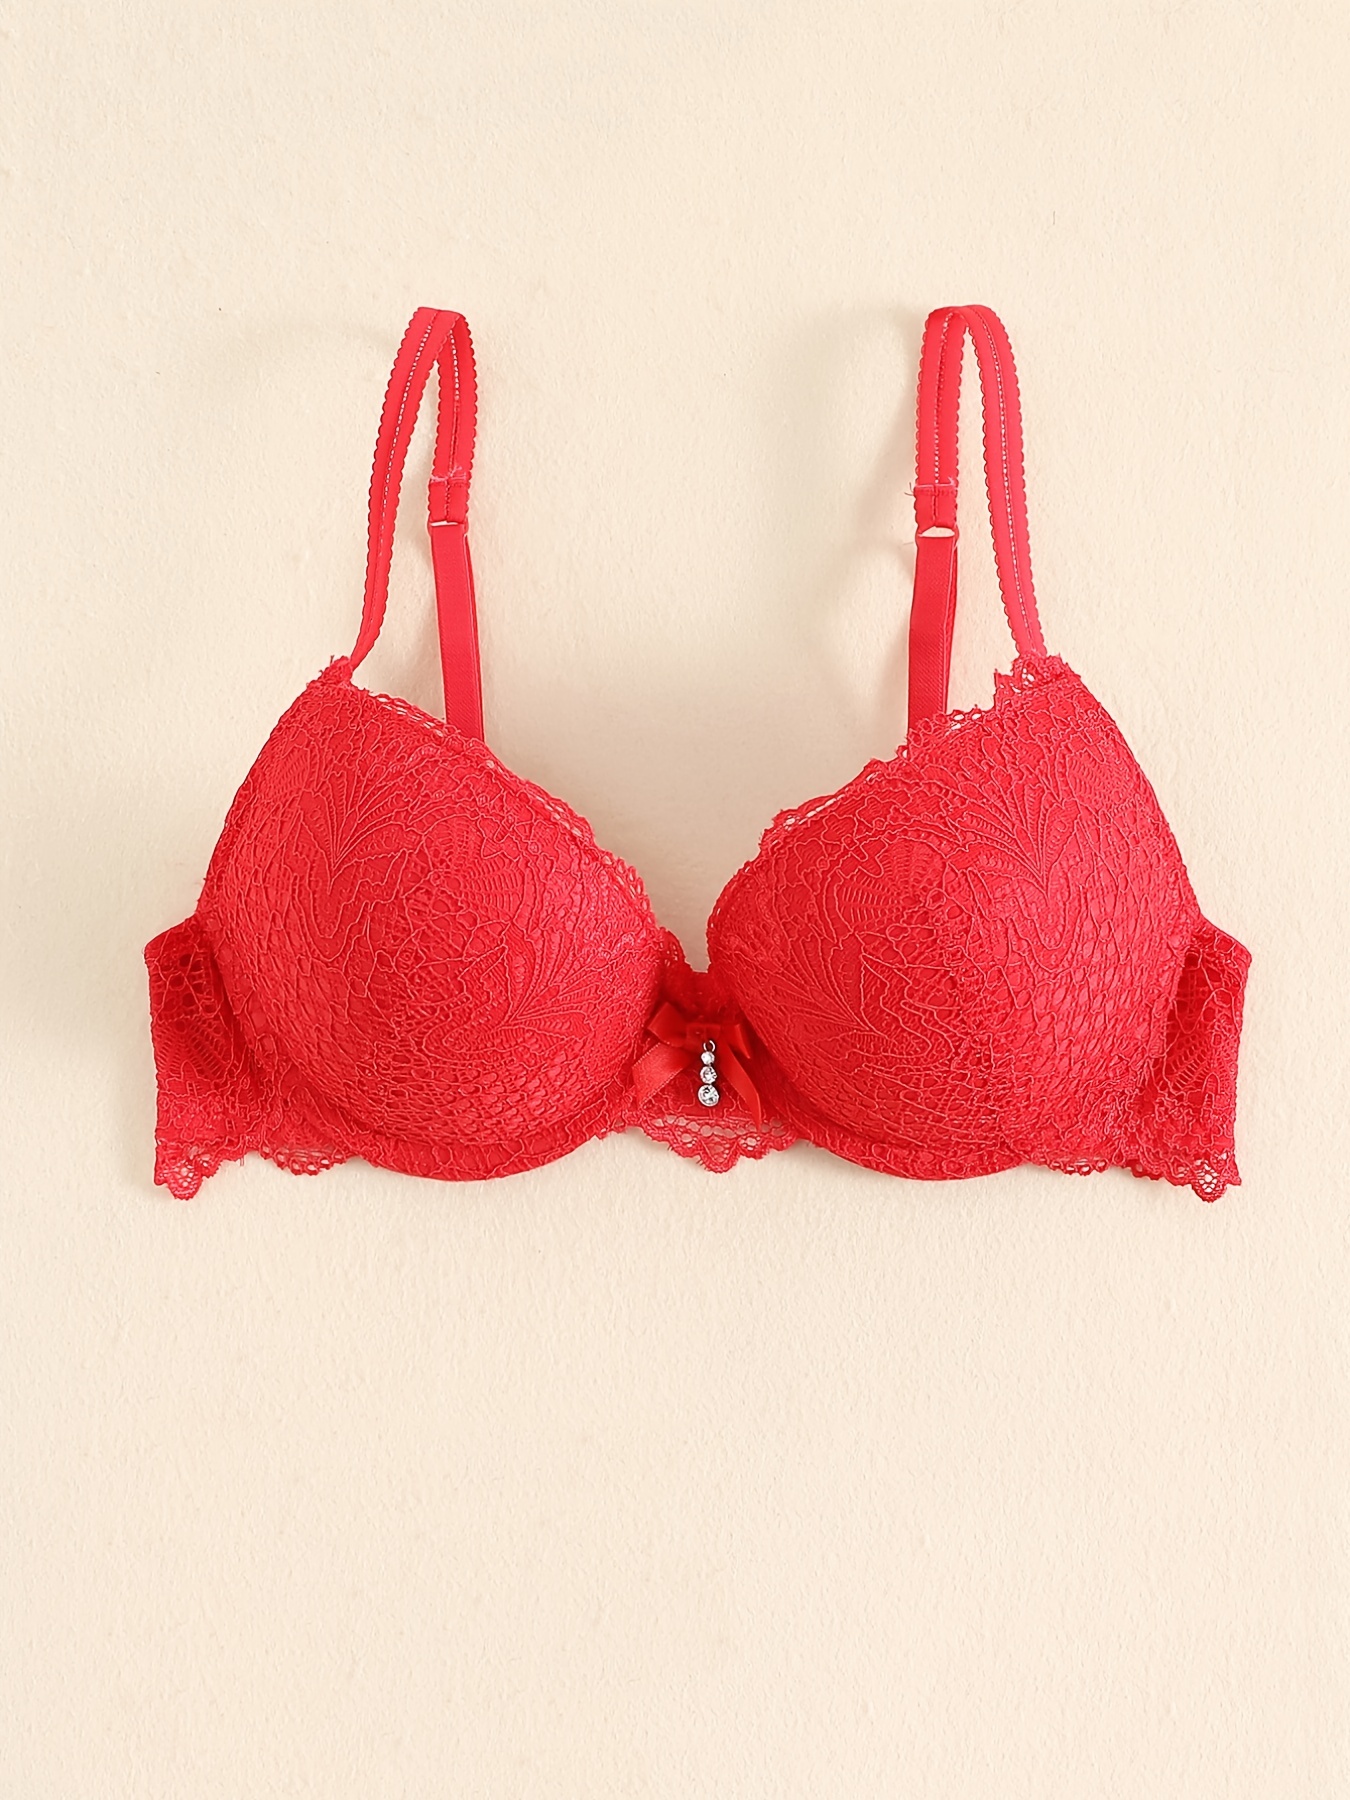 Buy Rahseh Women'S Small Cup Padded Bra With Design And Lace (25516) Red at